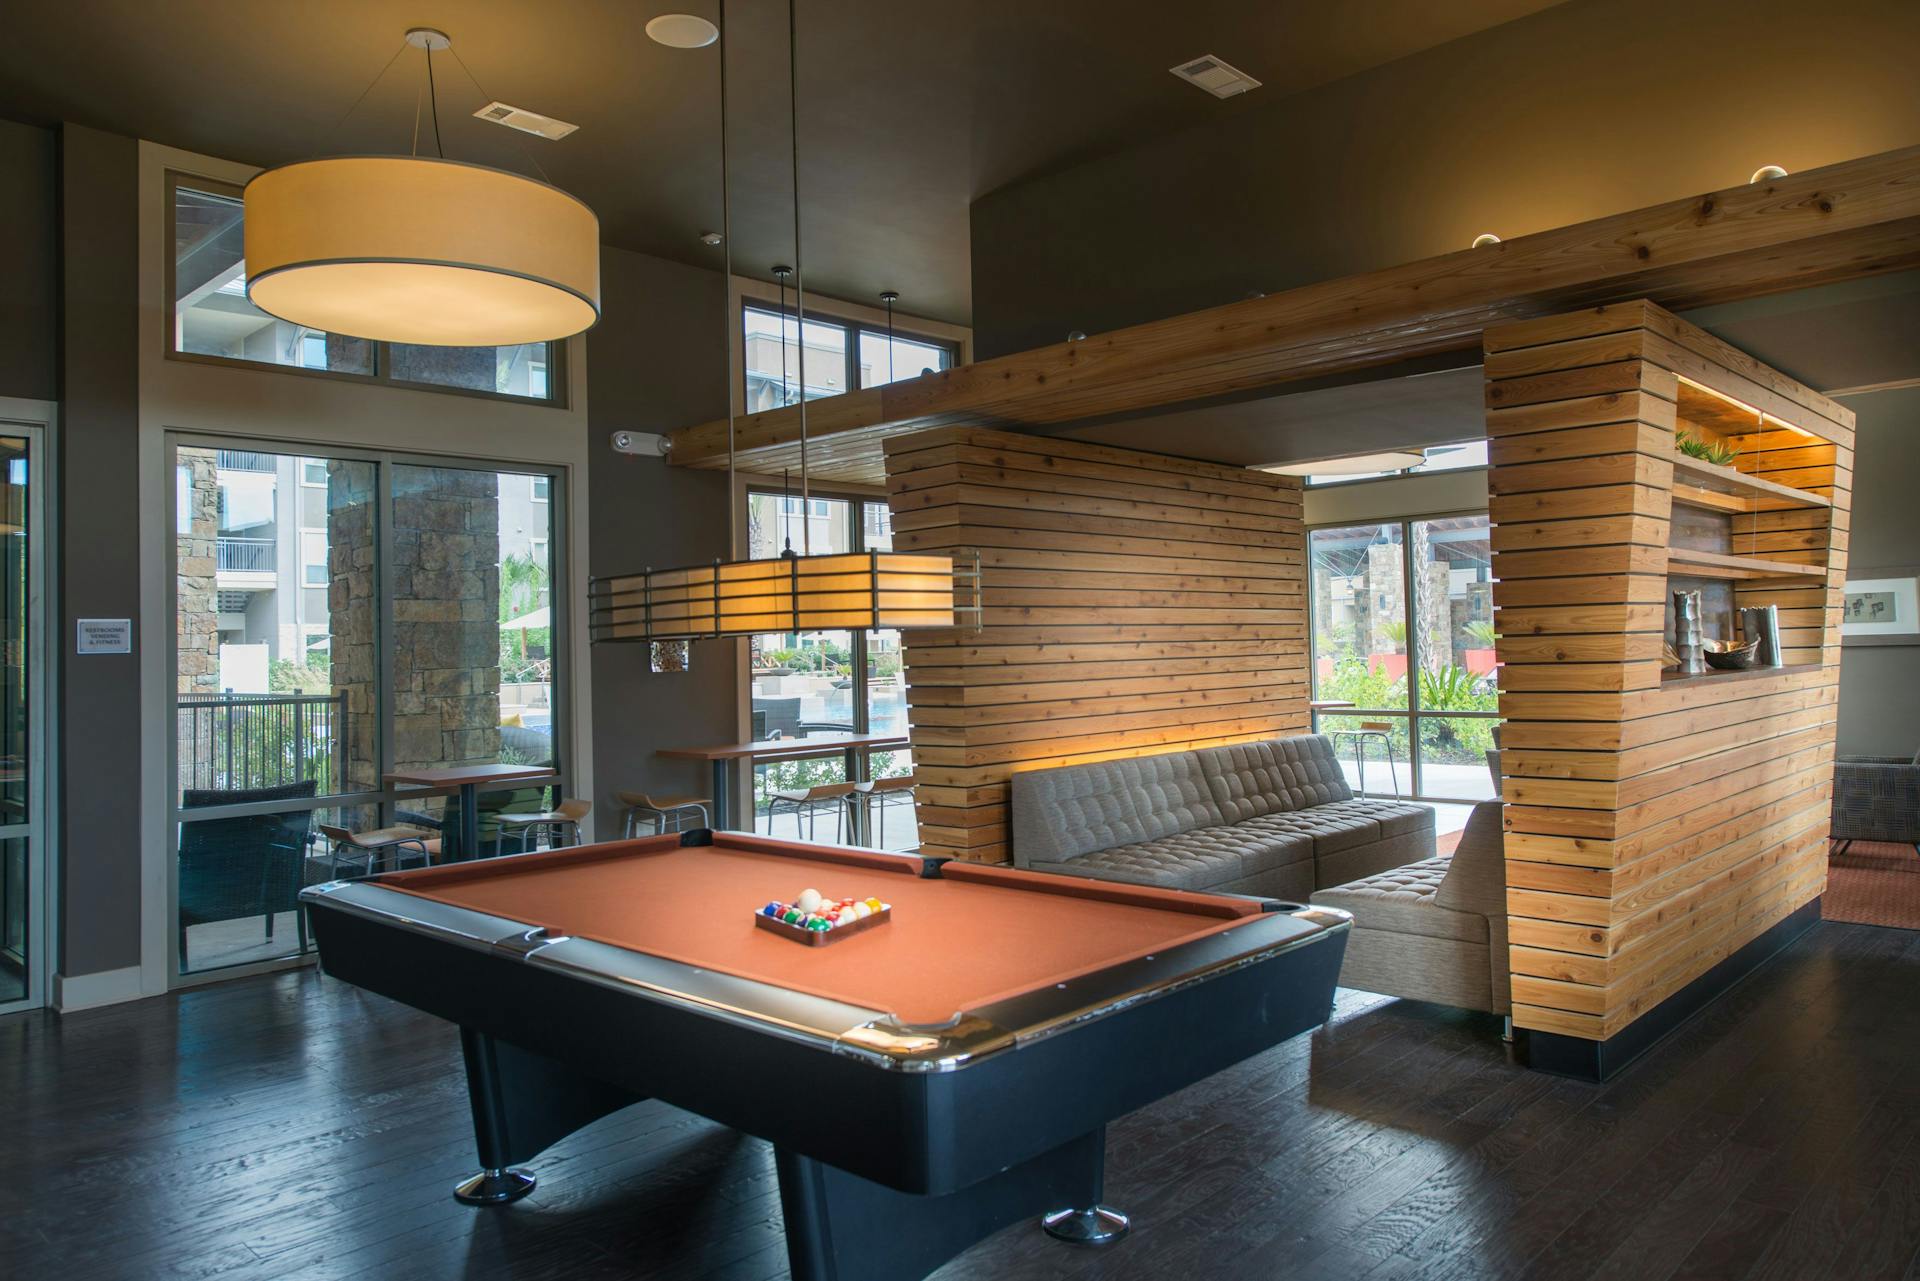 Community lounge with pool table